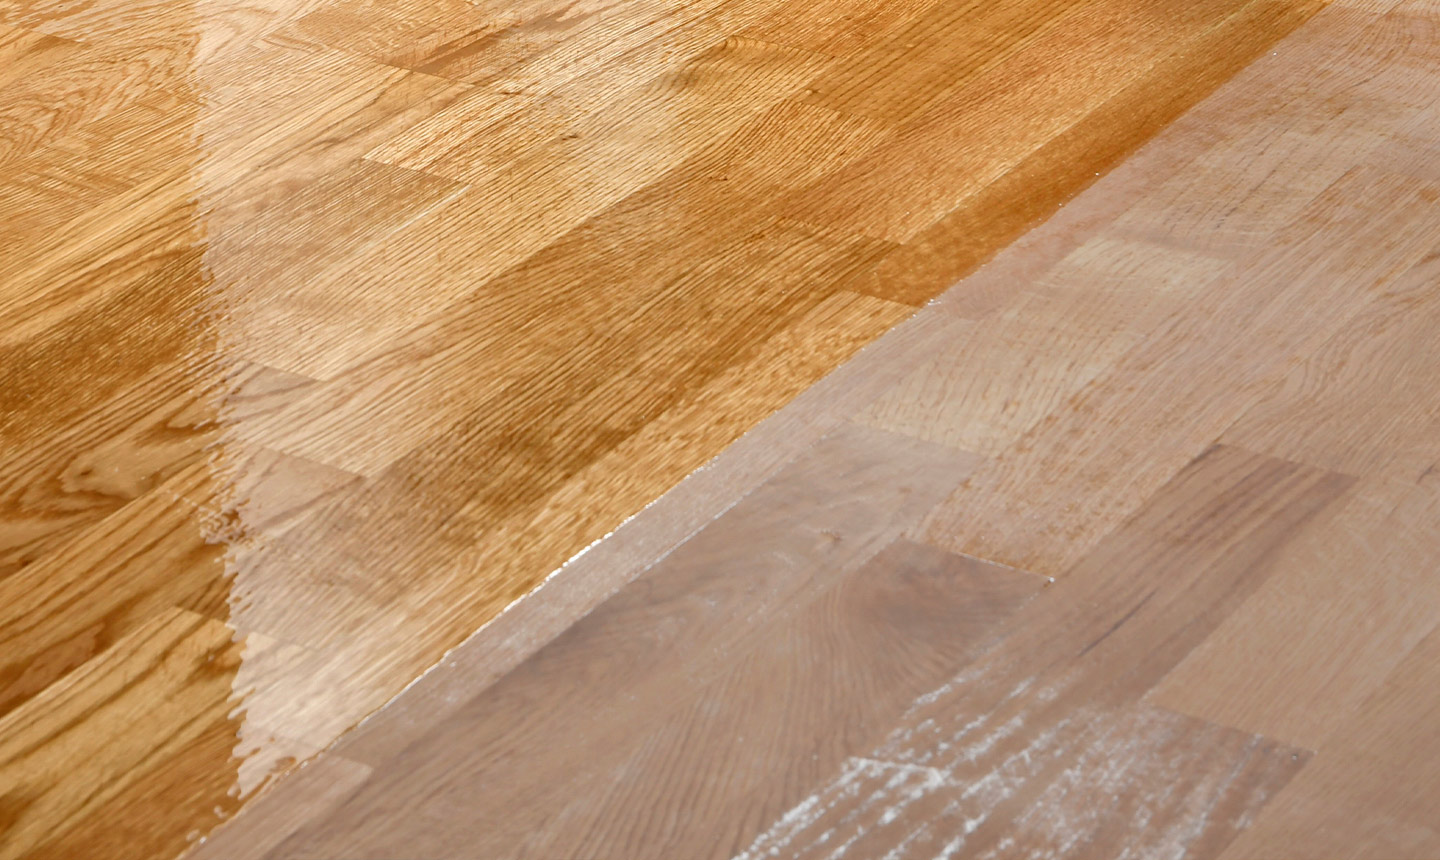 What do you do when your wooden floor fades?